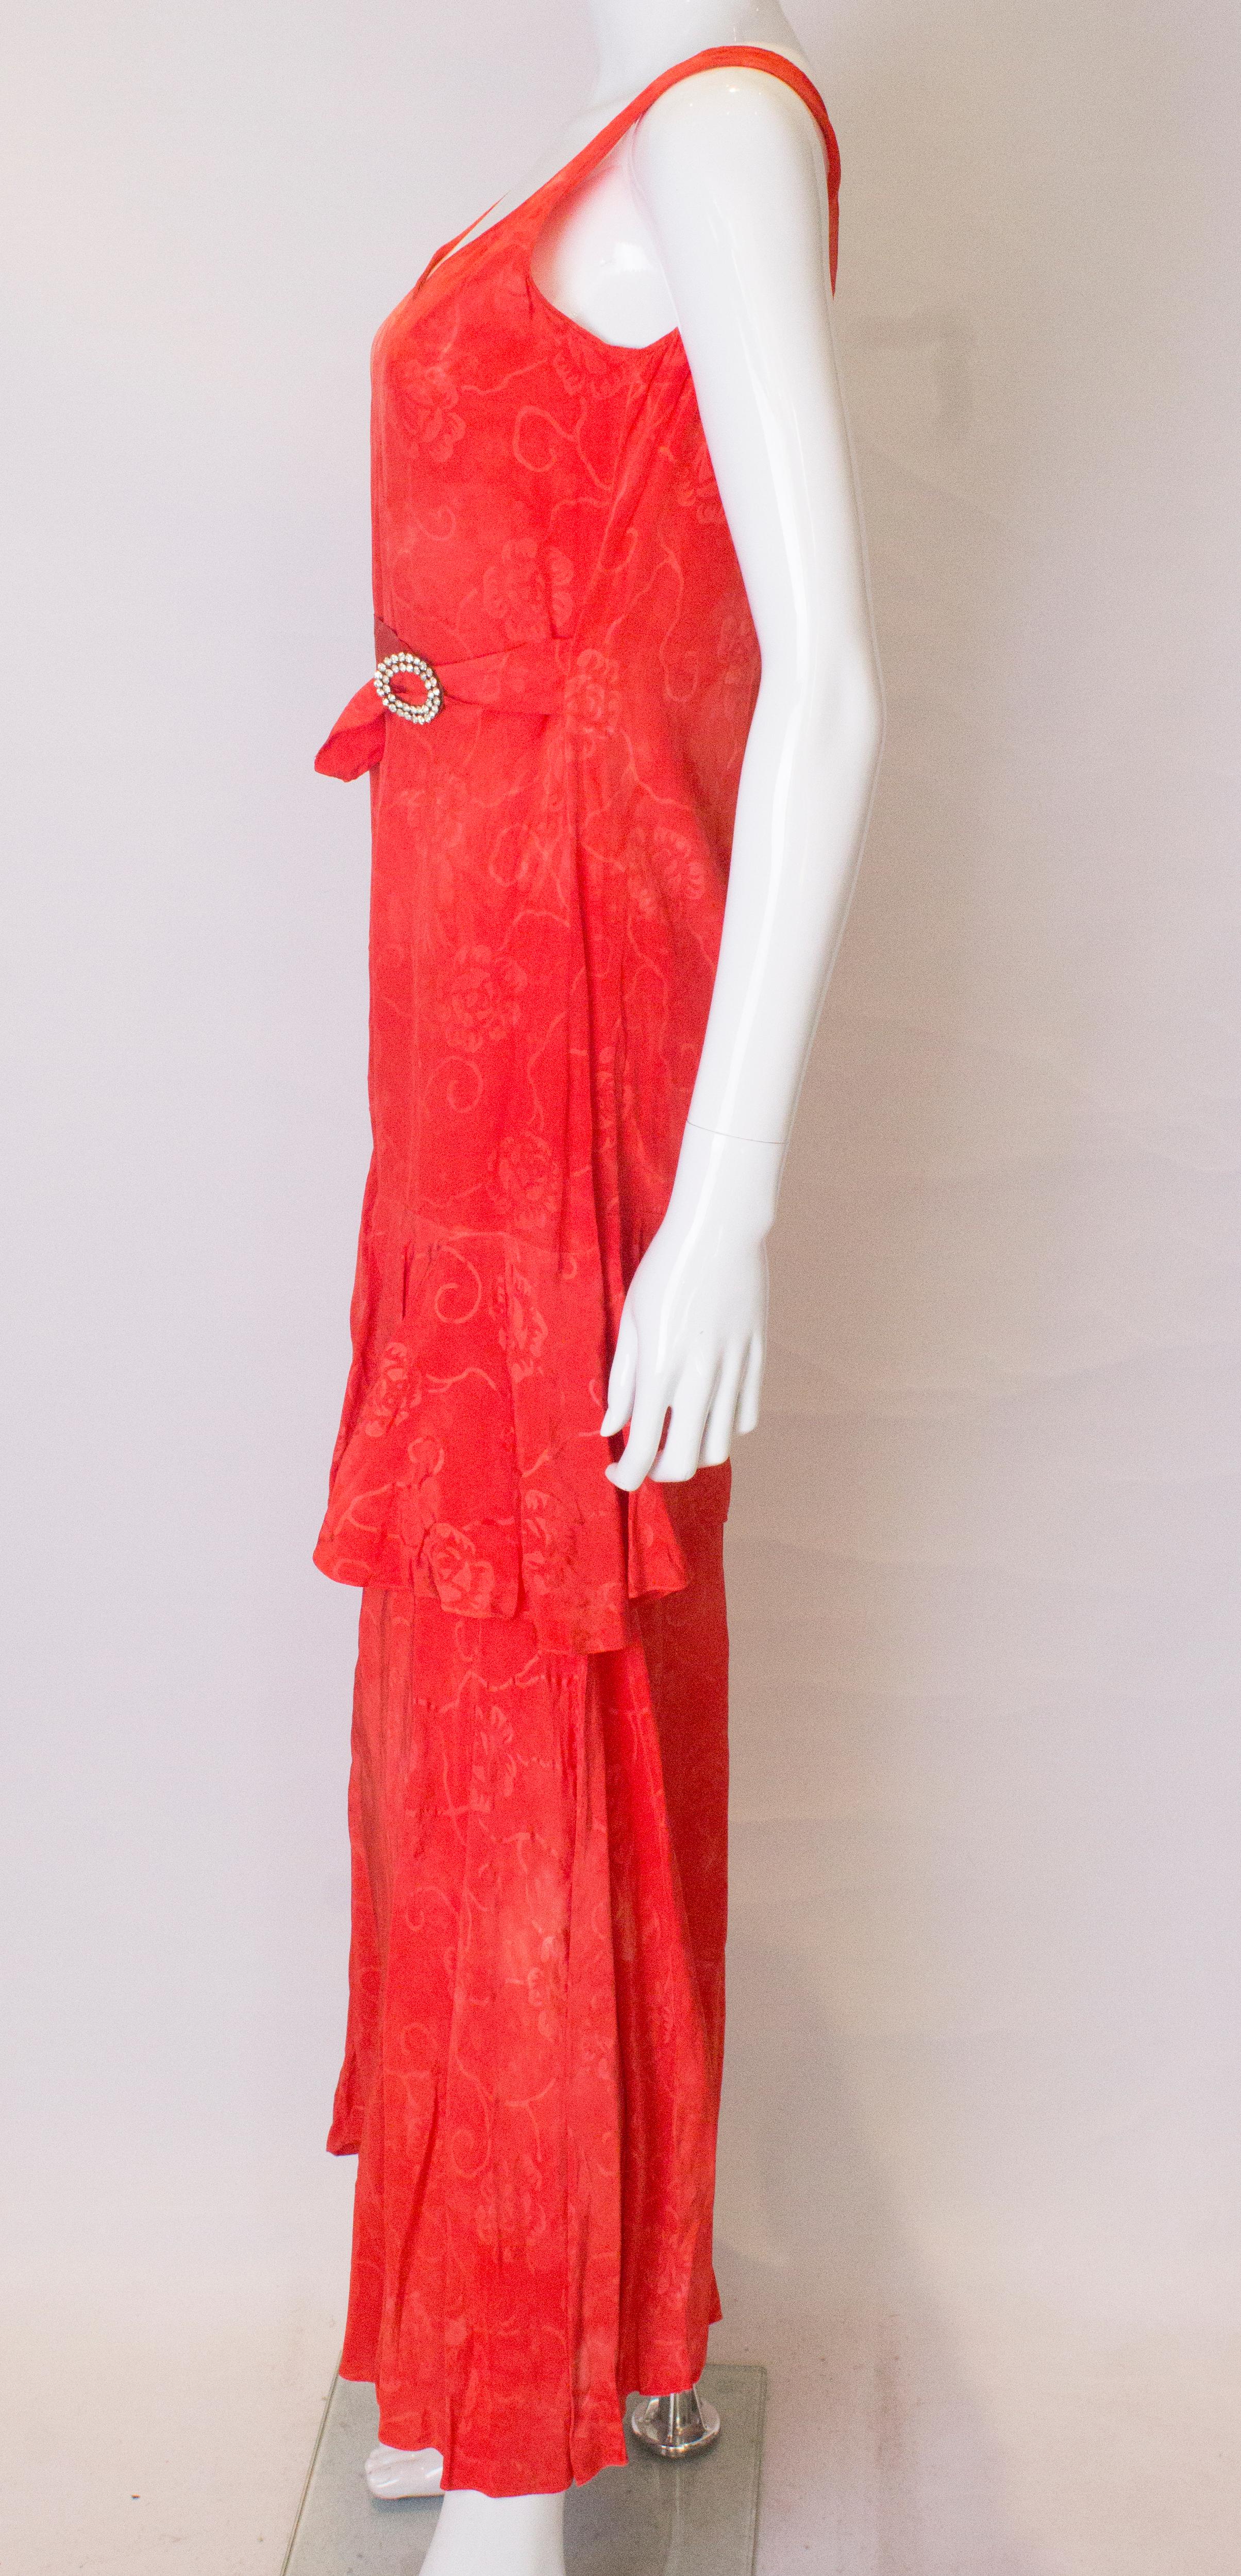 Red Vintage 1920s Silk Dress with Decorative Belt For Sale